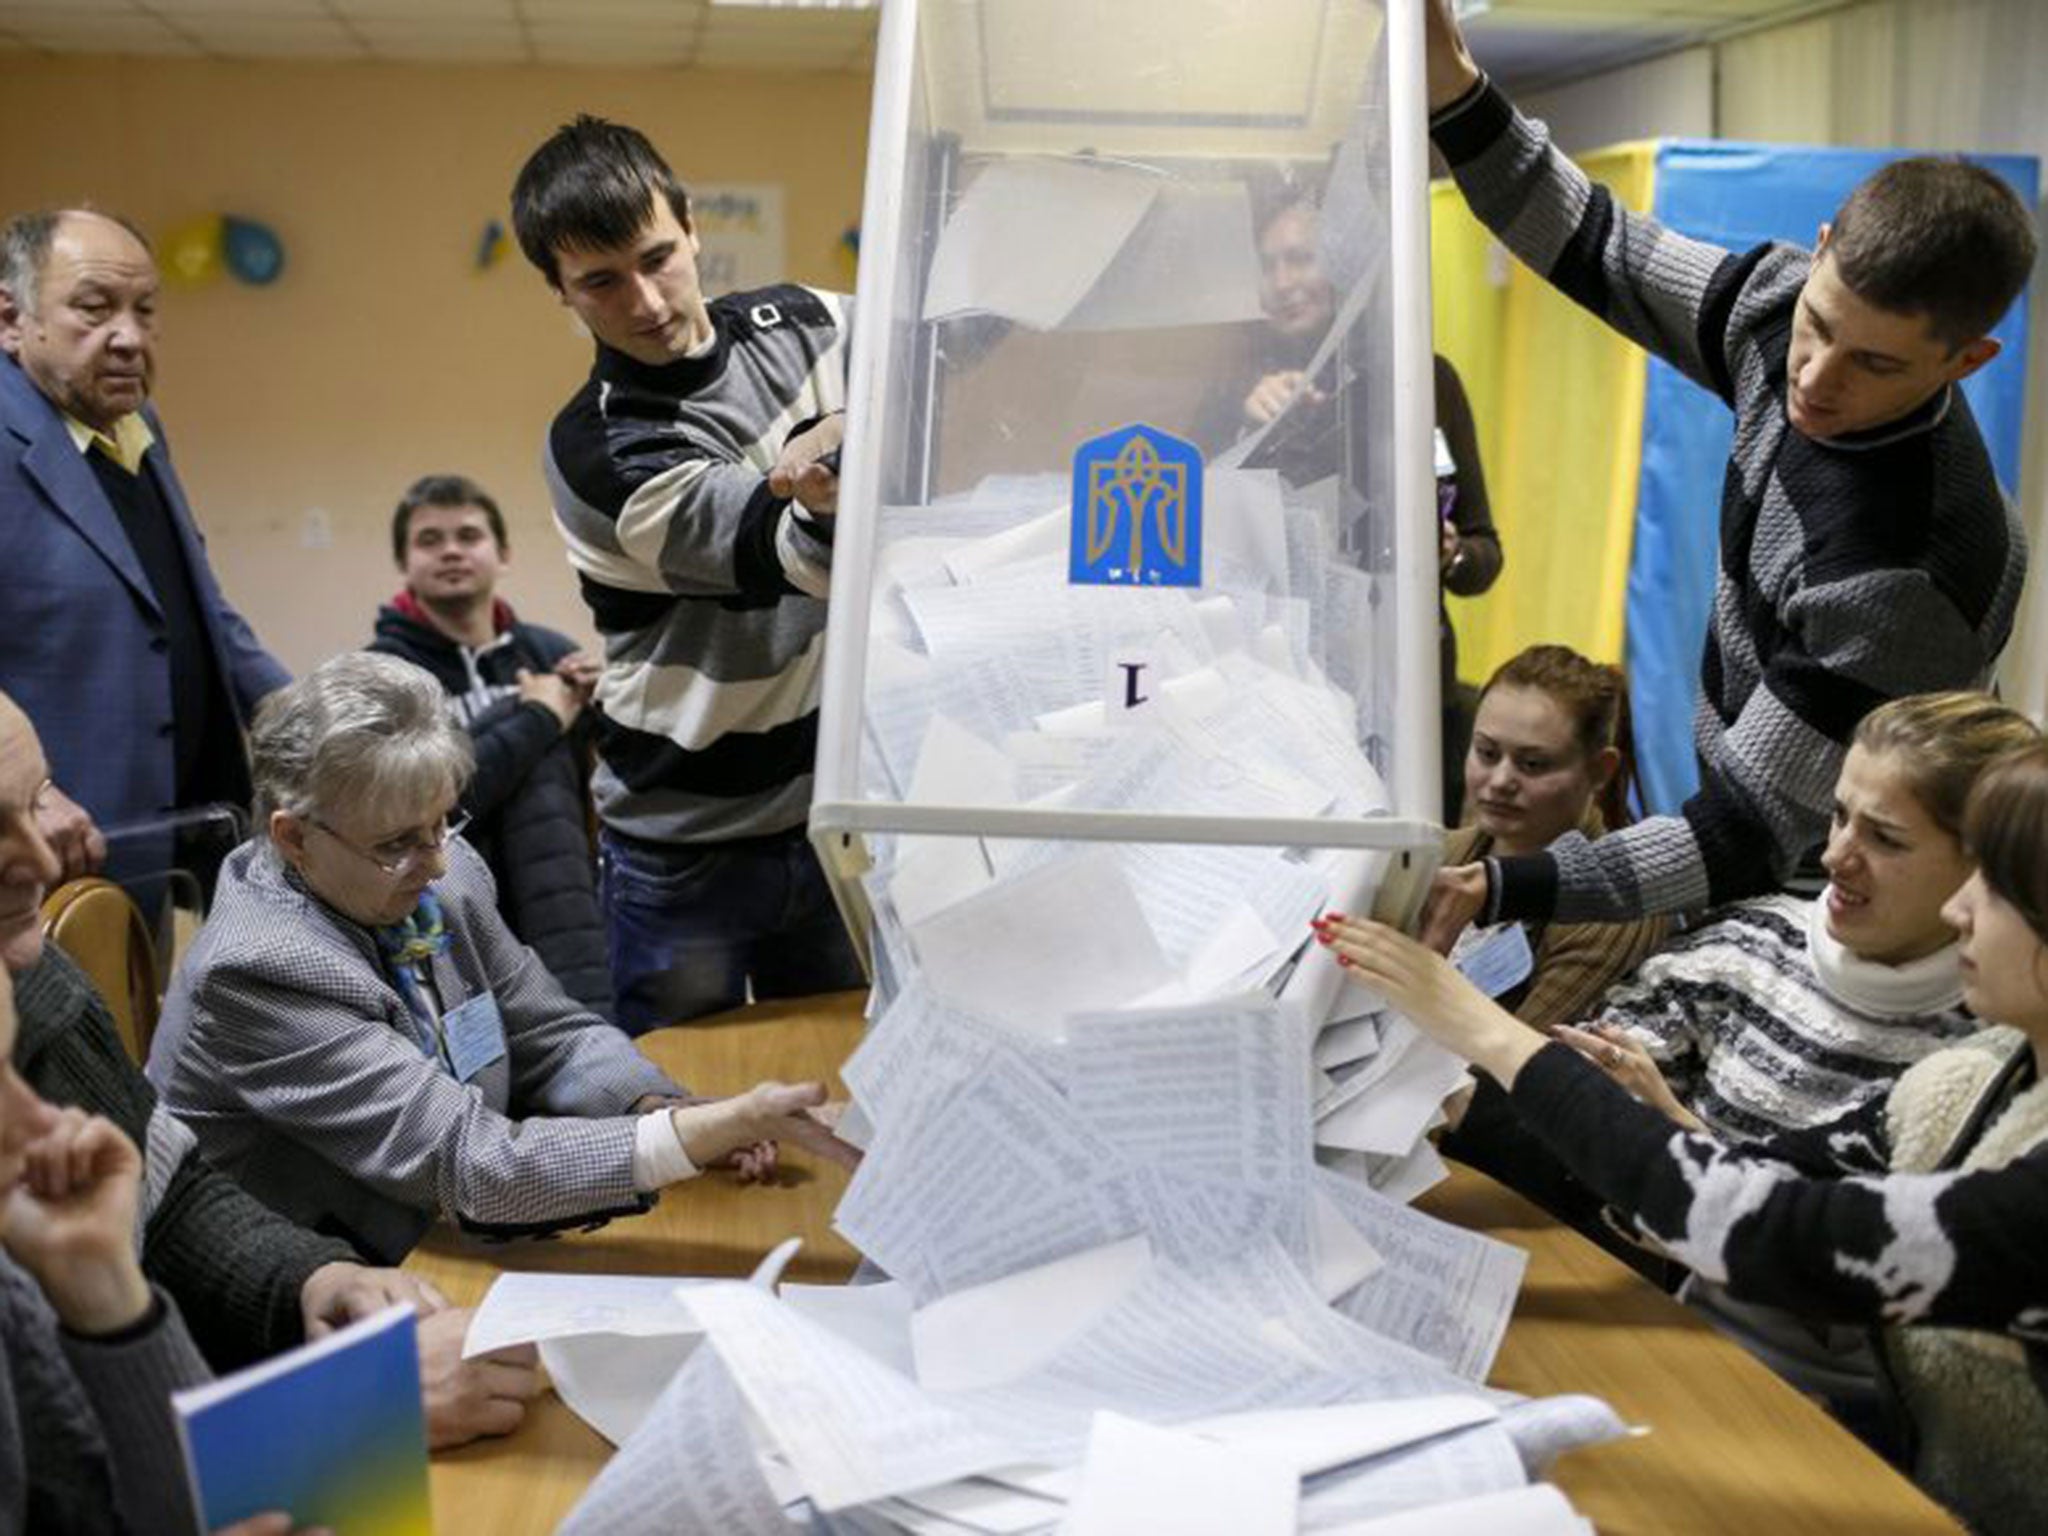 Members of a local electoral commission empty a ballot box at a polling station after voting day in Kiev on 26th October. 36 million Ukrainian people were registered to vote